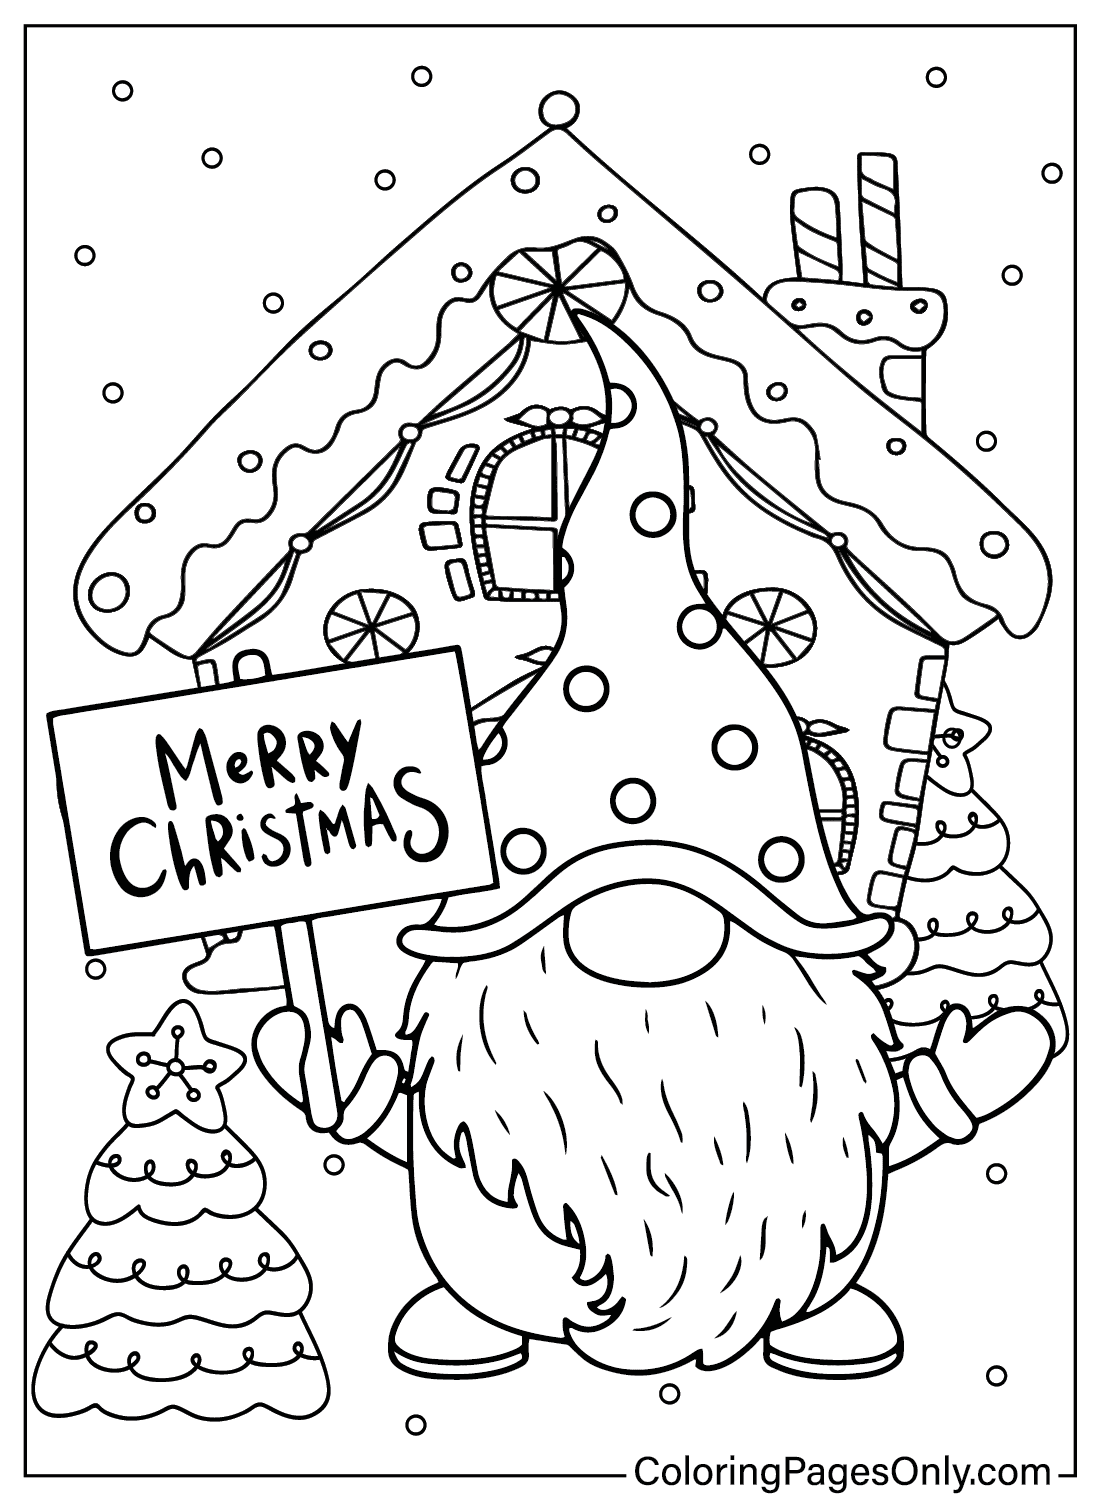 Gnome Coloring Pages - Free Printable Coloring Pages